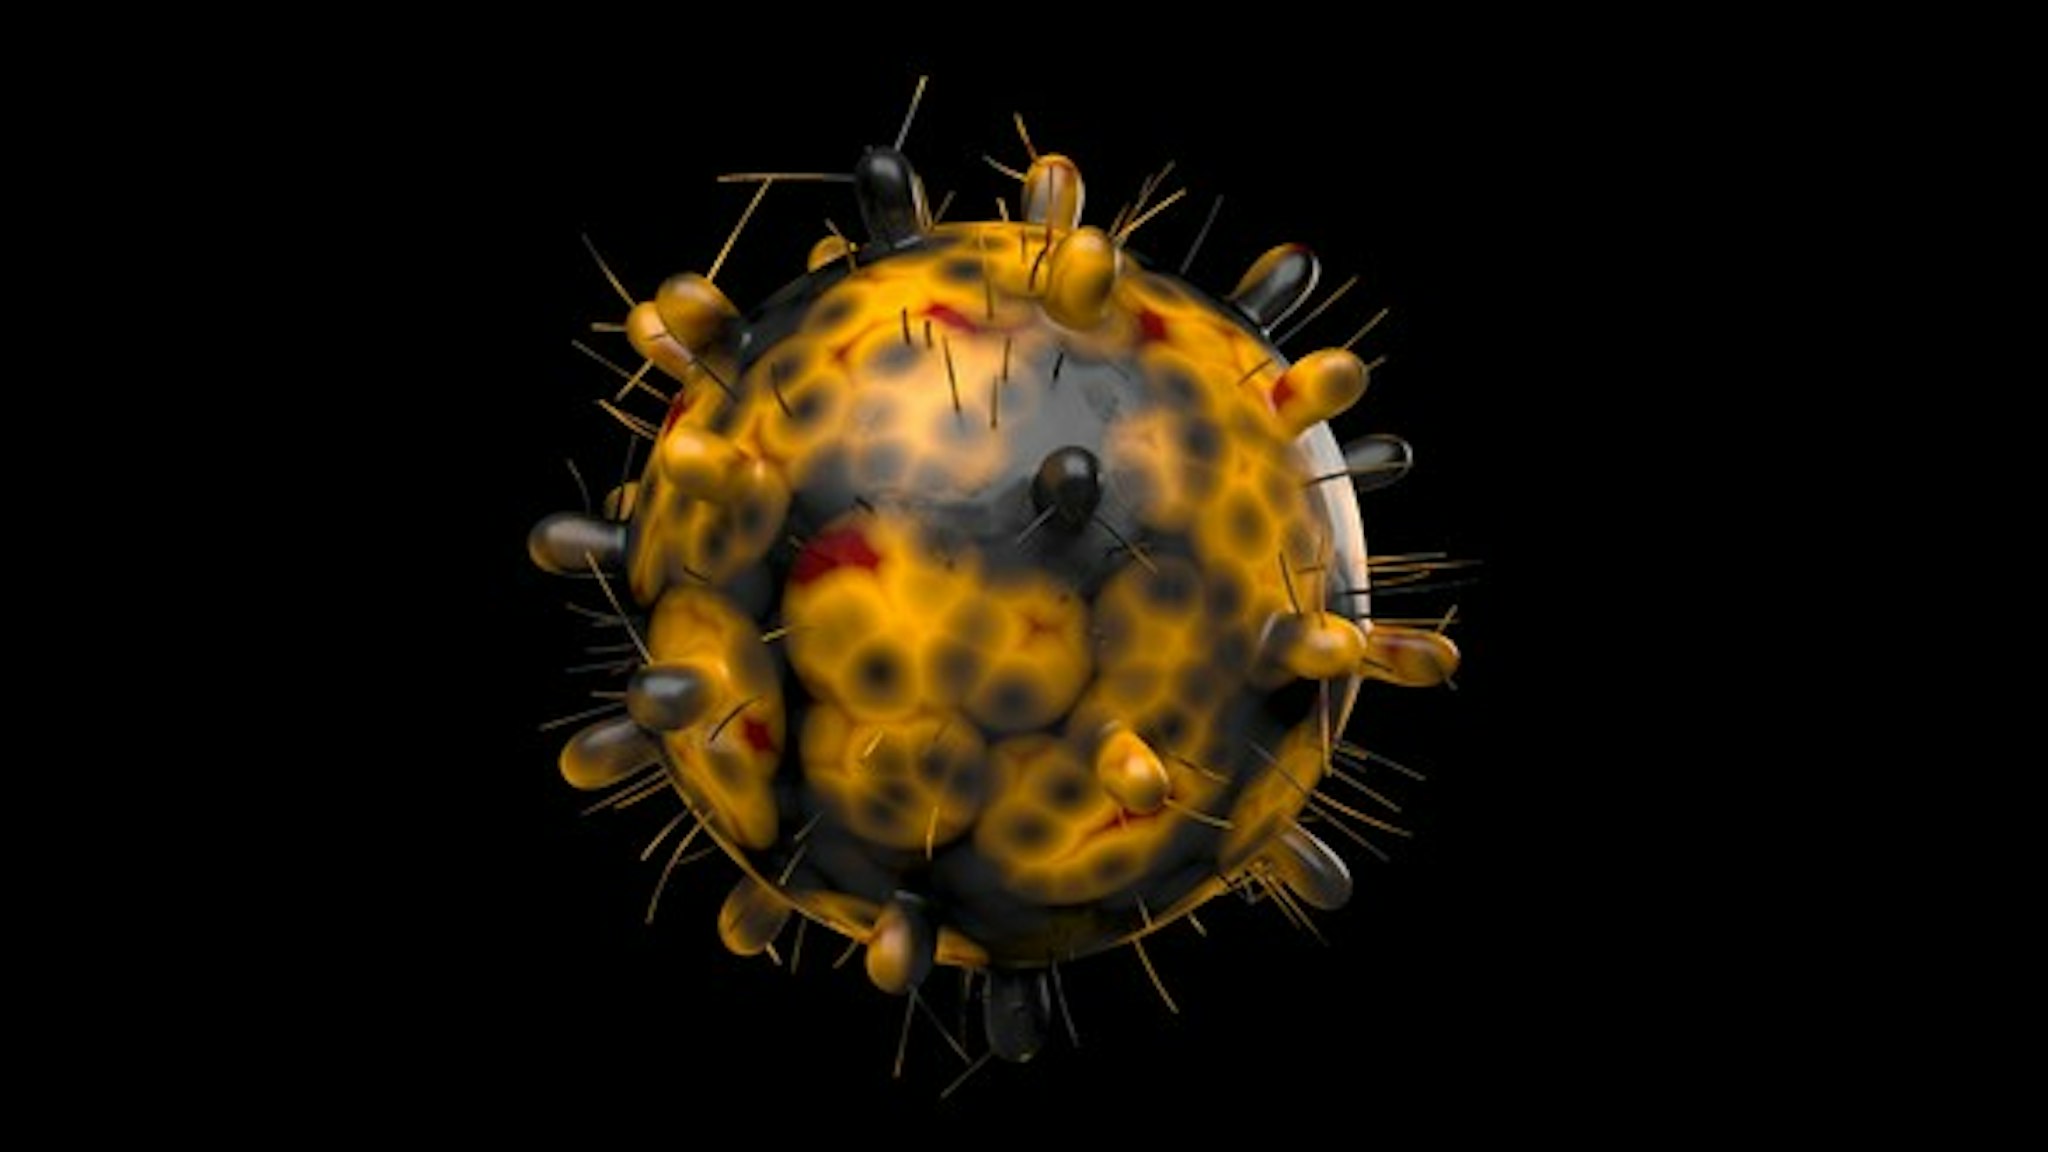 The B.1.1.529 variant was first reported to WHO from South Africa on 24 November 2021. it's the recent variant spotted in South Africa all Nations are on High Alert Now.This variant has a large number of mutations, some of which are concerning. Preliminary evidence suggests an increased risk of reinfection with this variant. Here's a computer generated image of coronavirus omicron against black background.